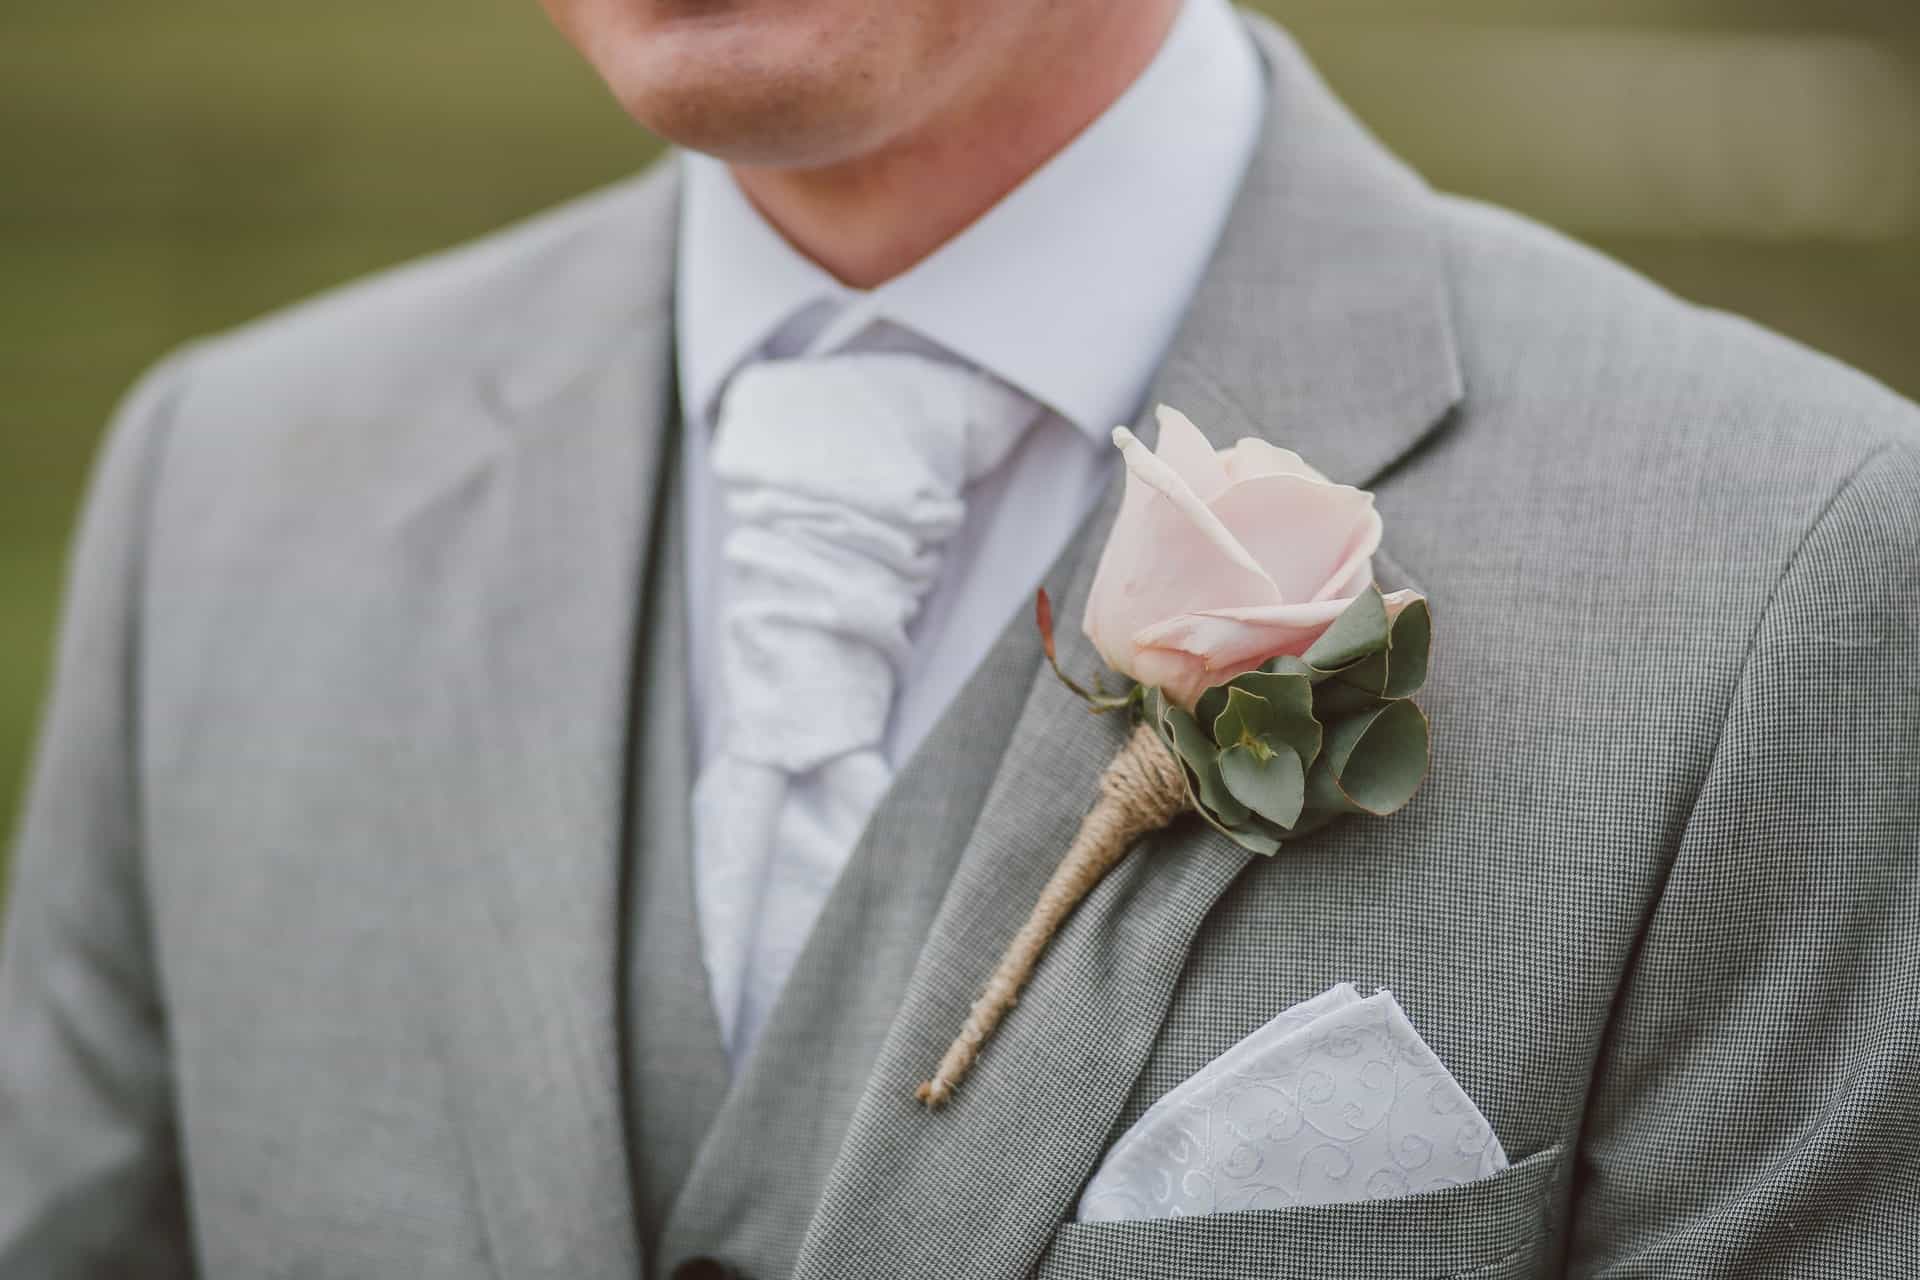 Wedding suit – what to look for when buying?